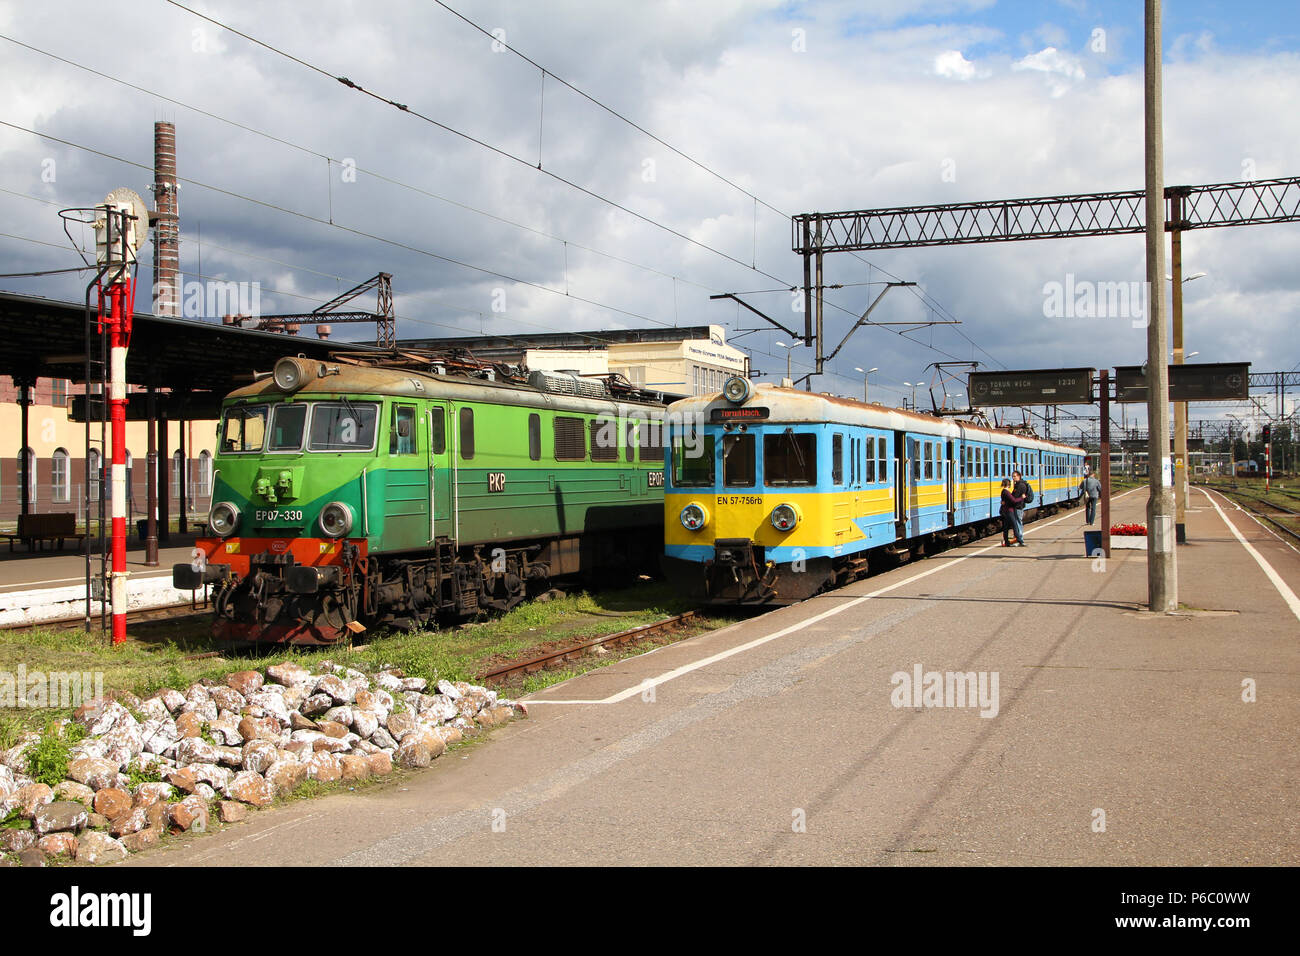 TORUN, POLAND - SEPTEMBER 6: Trains operated by PKP Przewozy Regionalne on September 6, 2010 in Torun, Poland. As of 2009, PKP group had 102,000 emplo Stock Photo